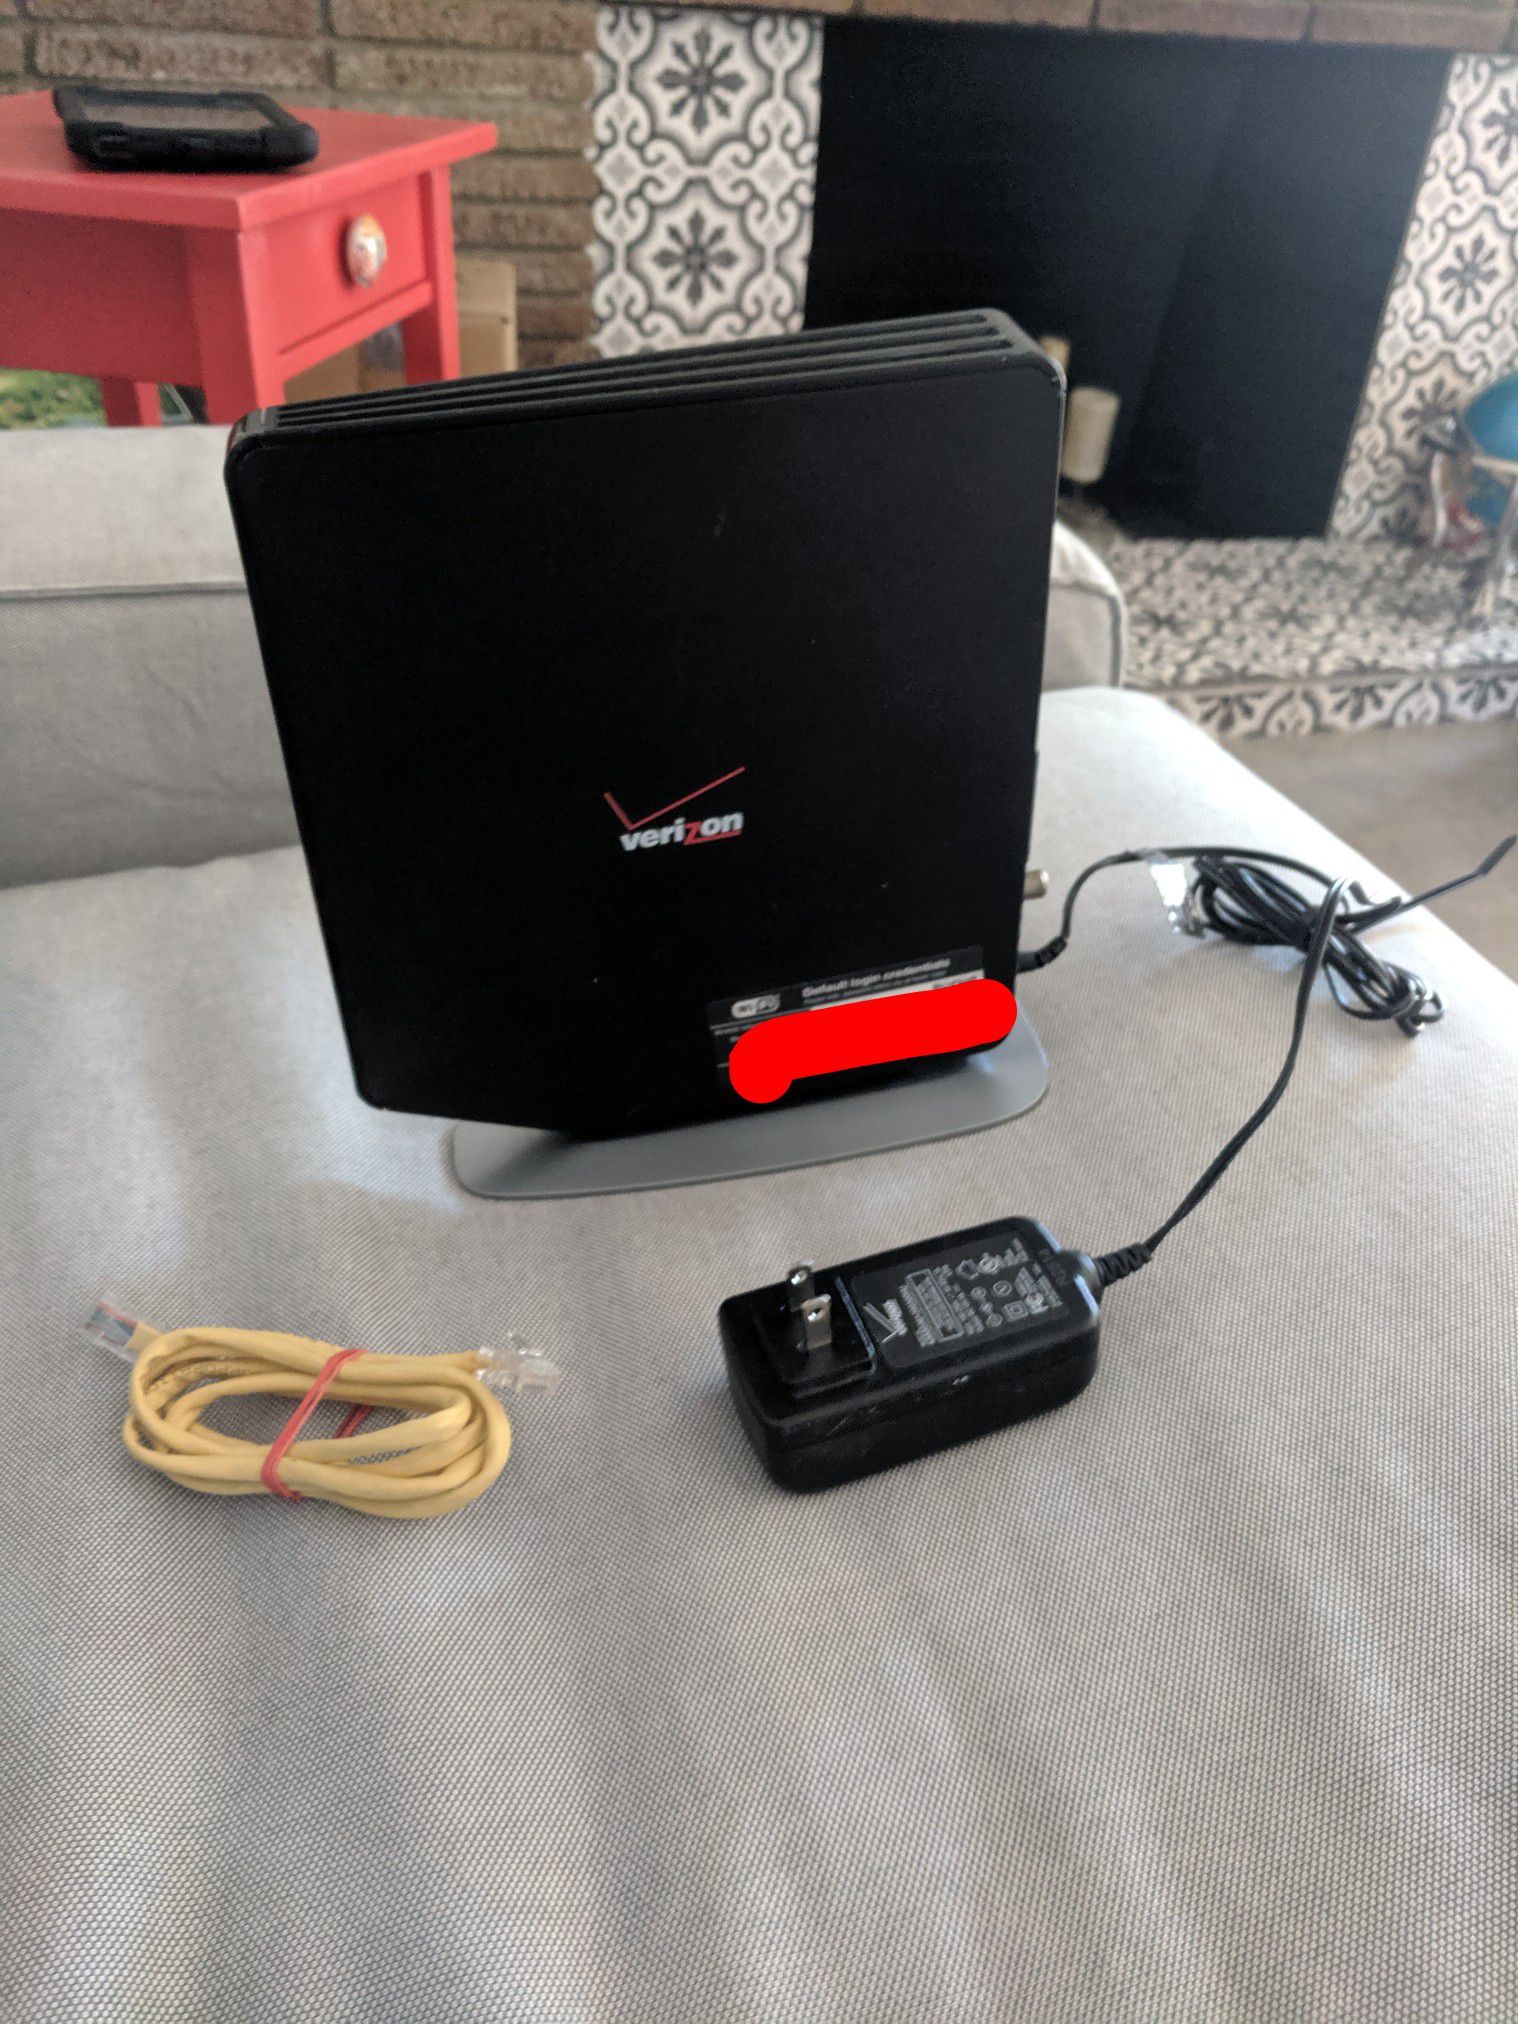 Frontier Fios Gateway g1100 router and modem